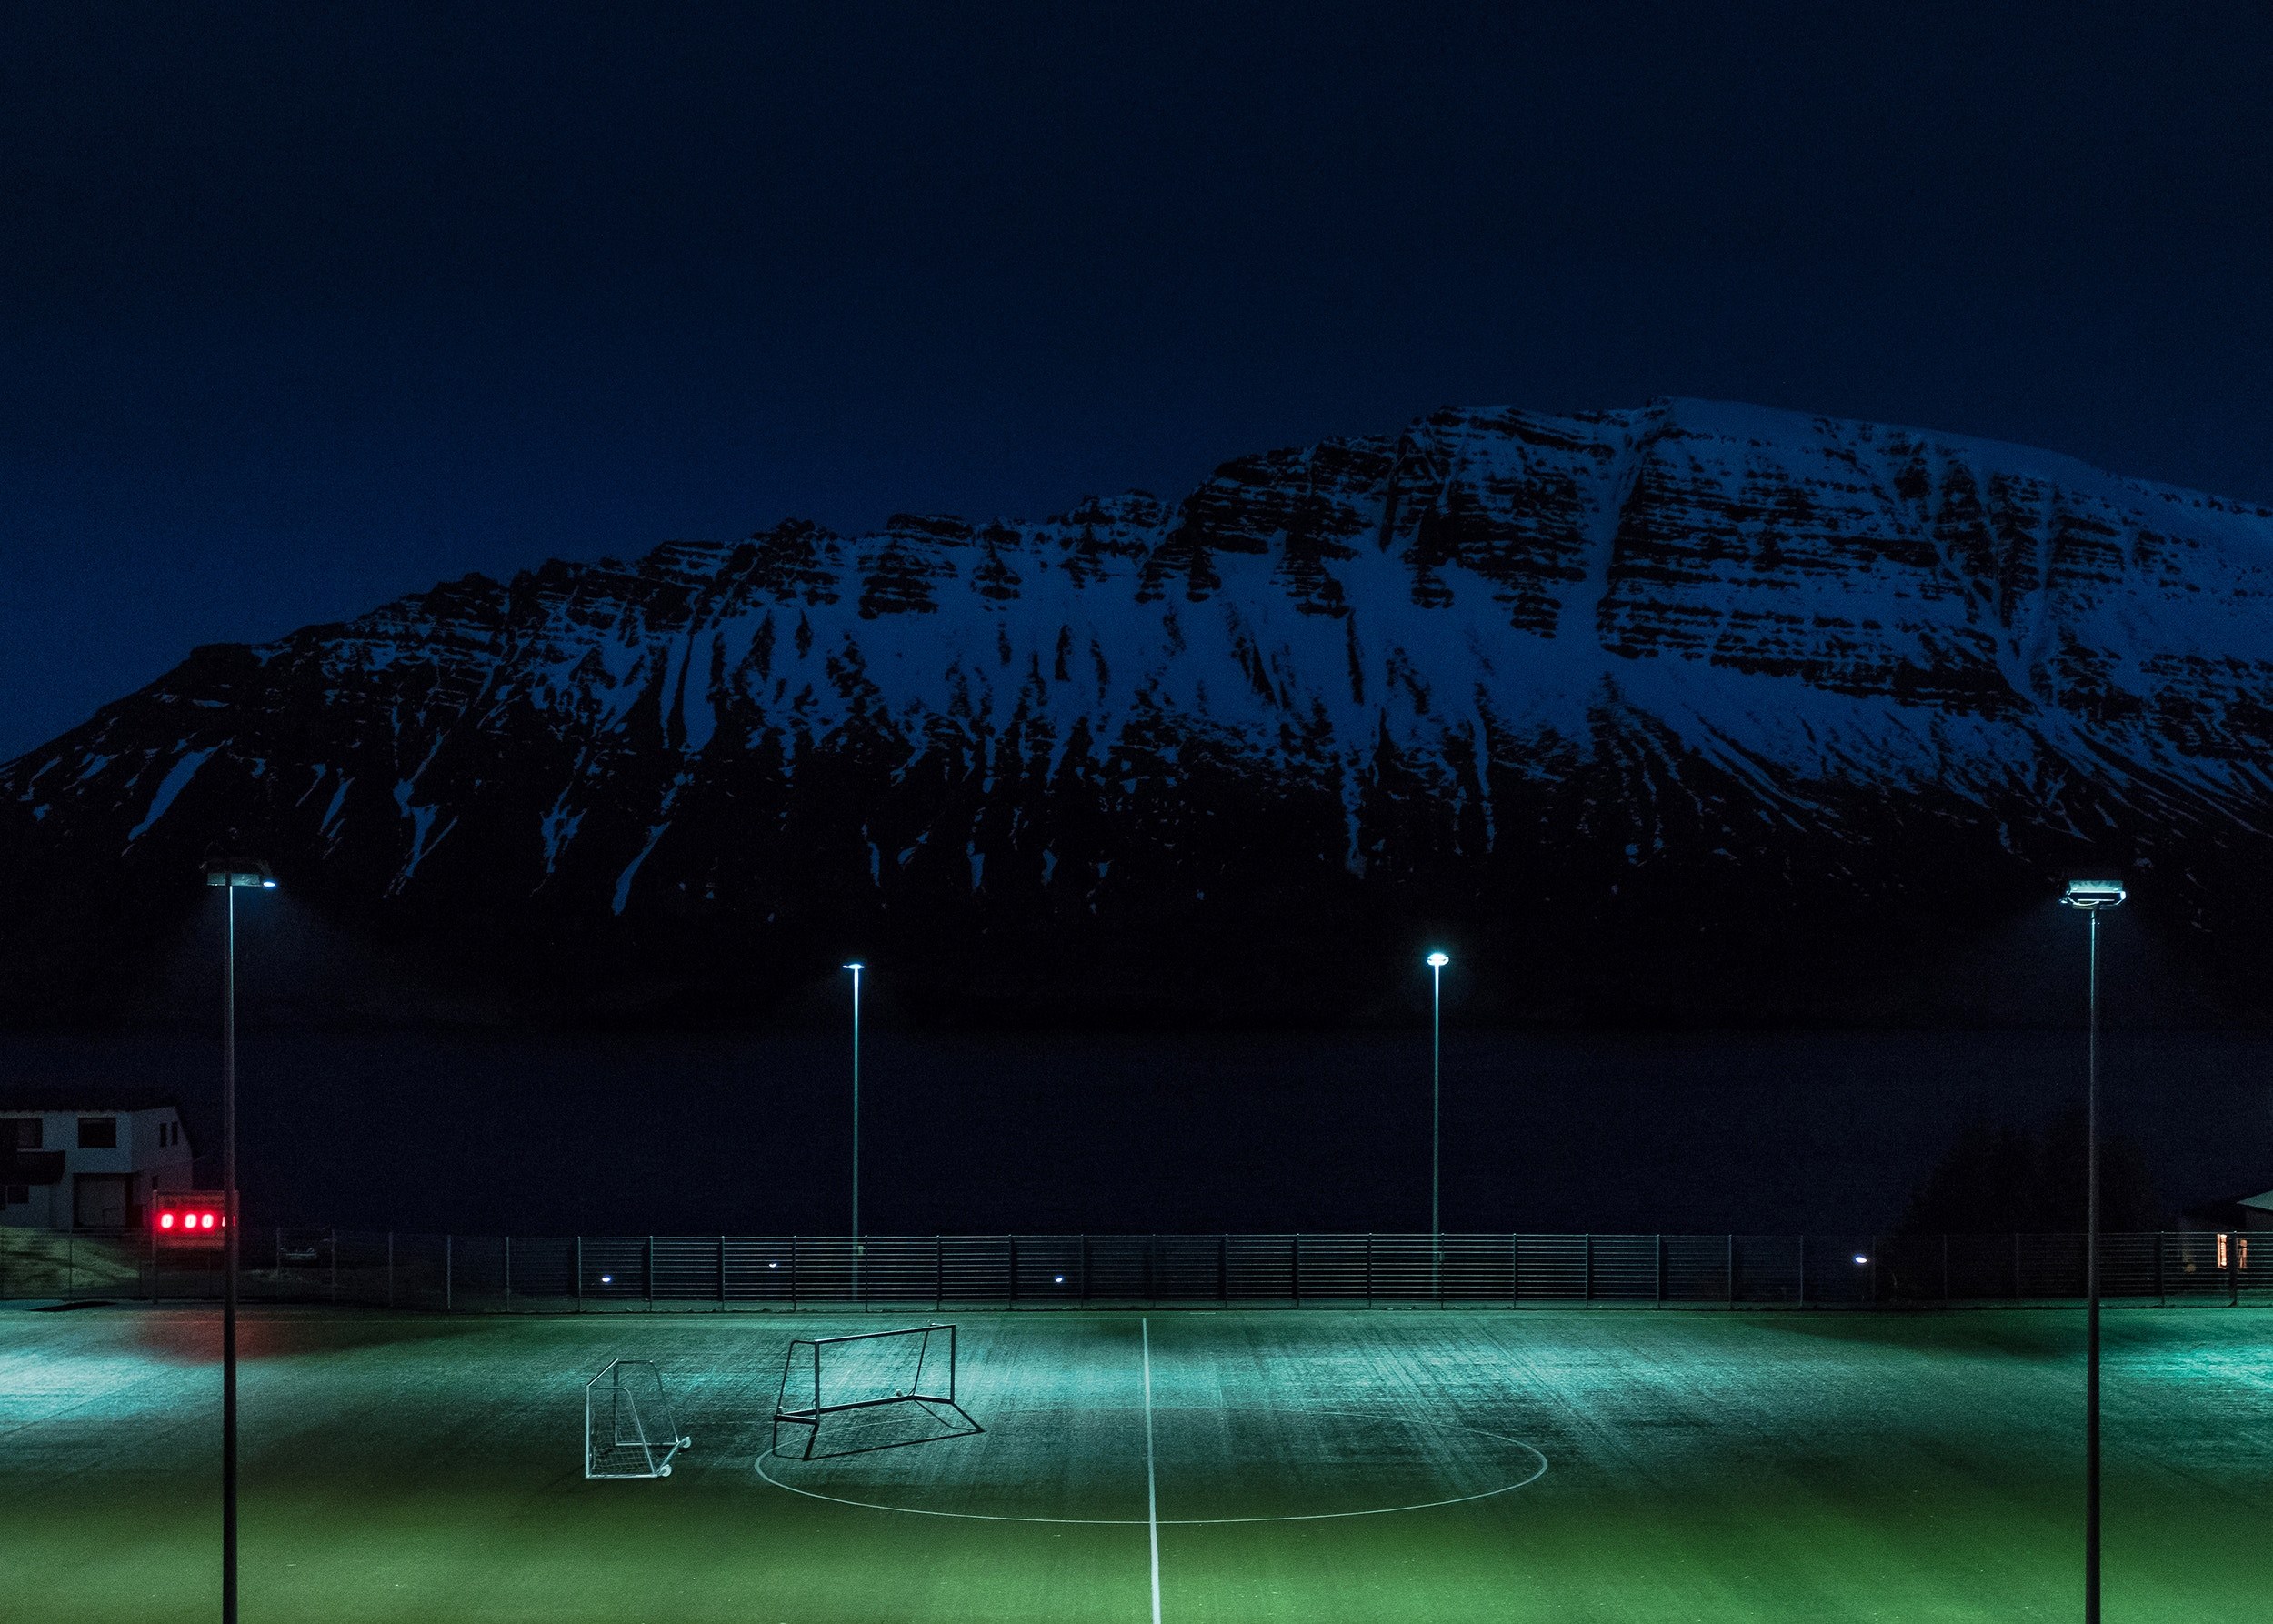 Wallpaper ID 239719 turf soccer pitch illuminated by